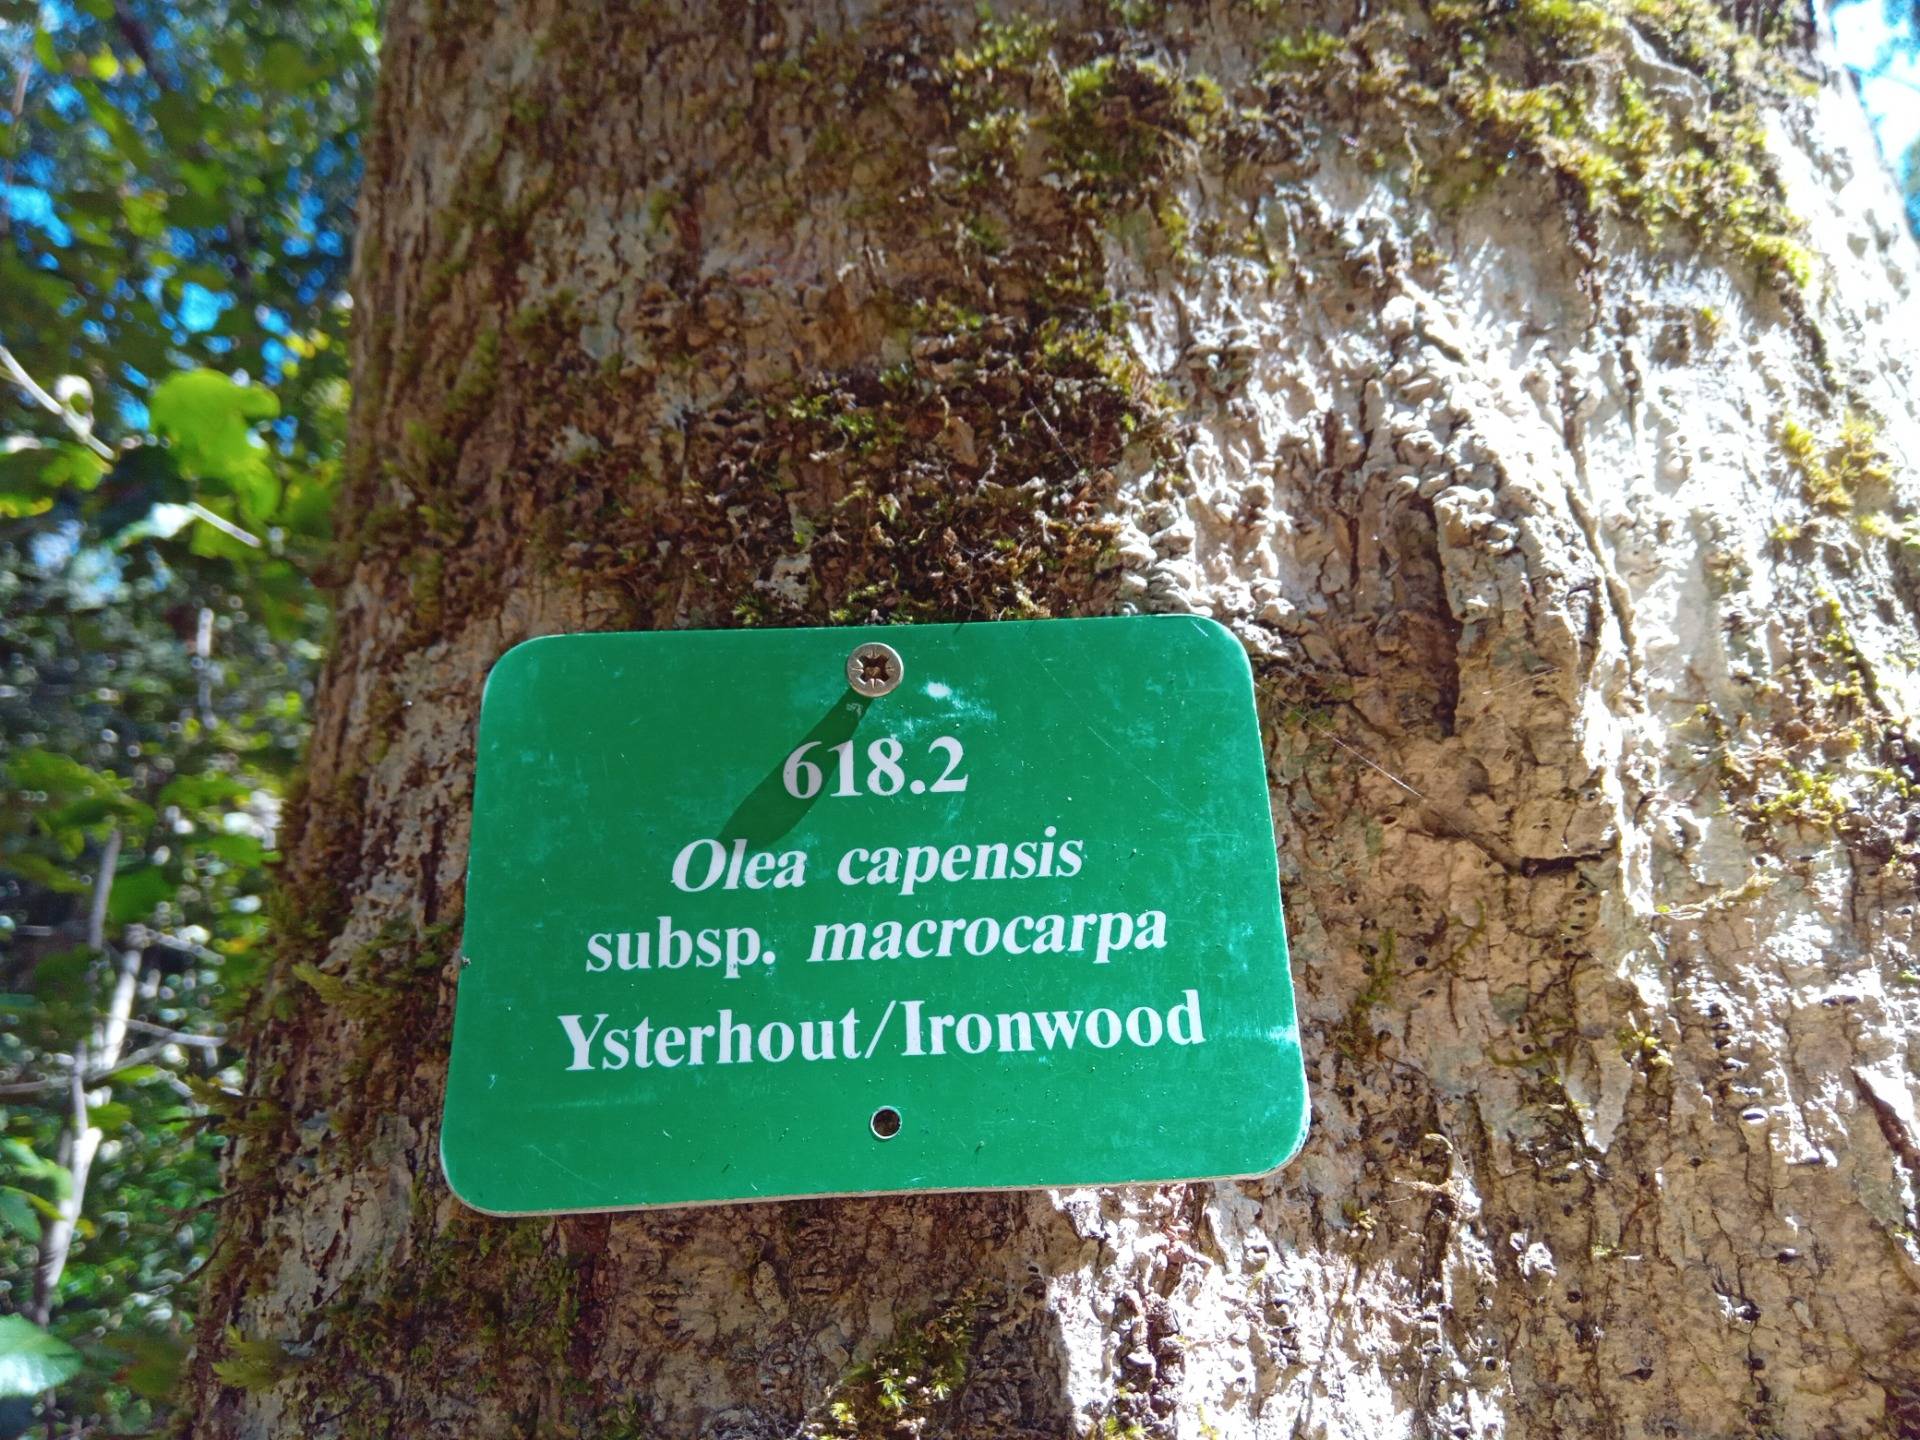 Indigenous Iron wood tree labeled for educational purposes.